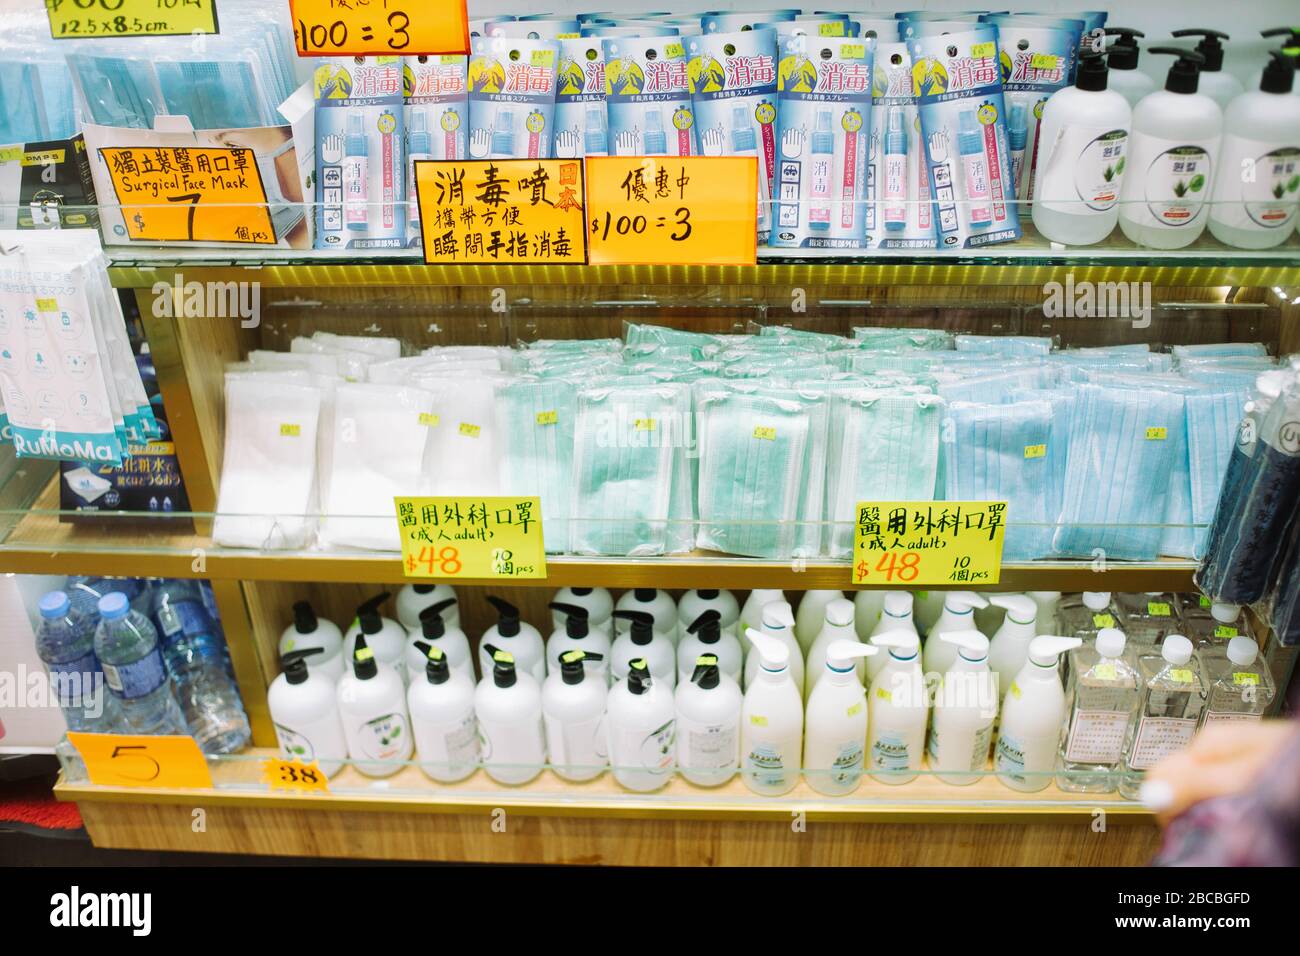 Hong Kong, 04 April 2020 - Surgical masks are being sold in Hong Kong with an increased price due to coronavirus. Stock Photo